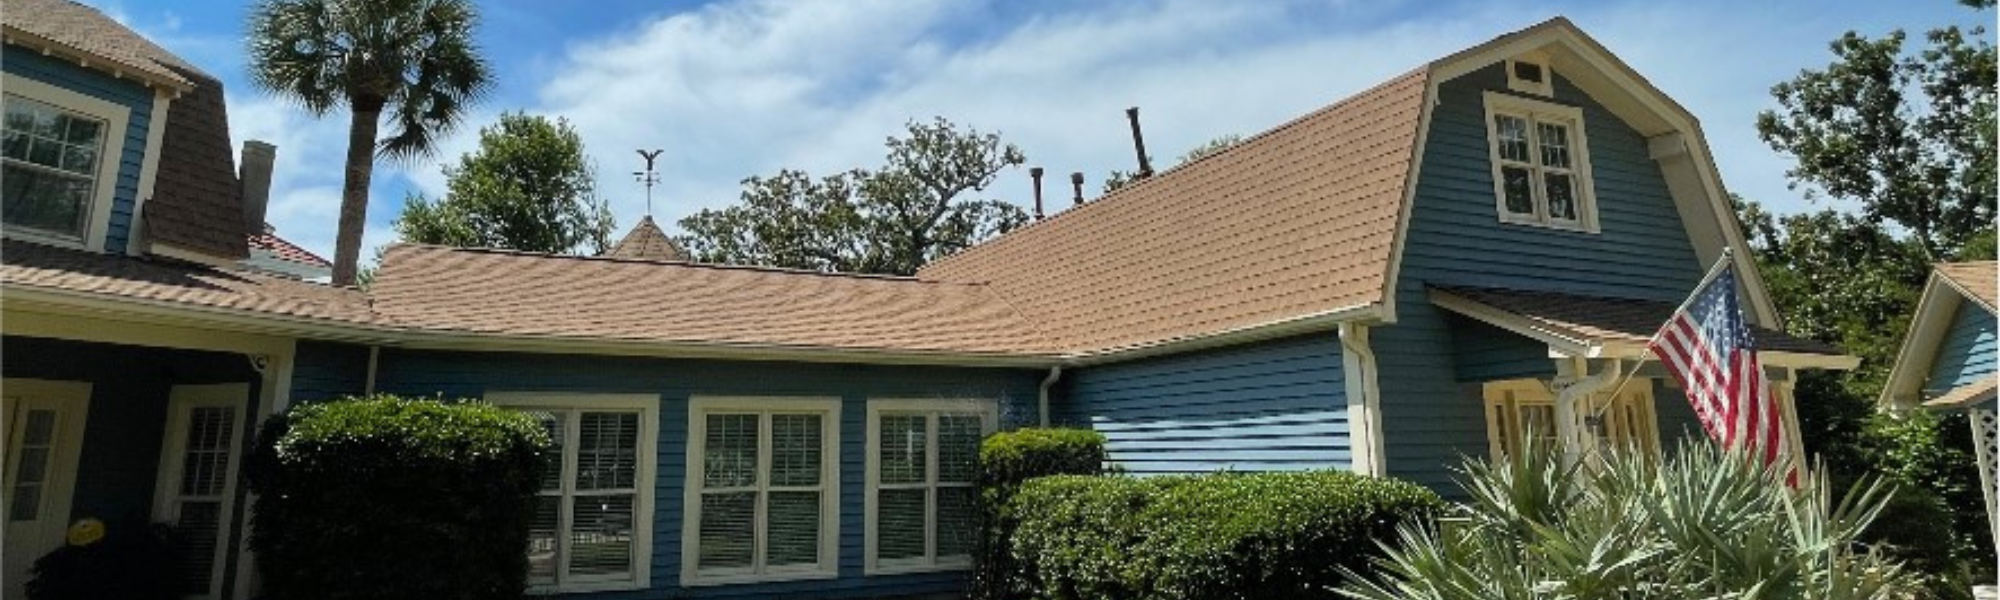 Repair or Replace a Roof